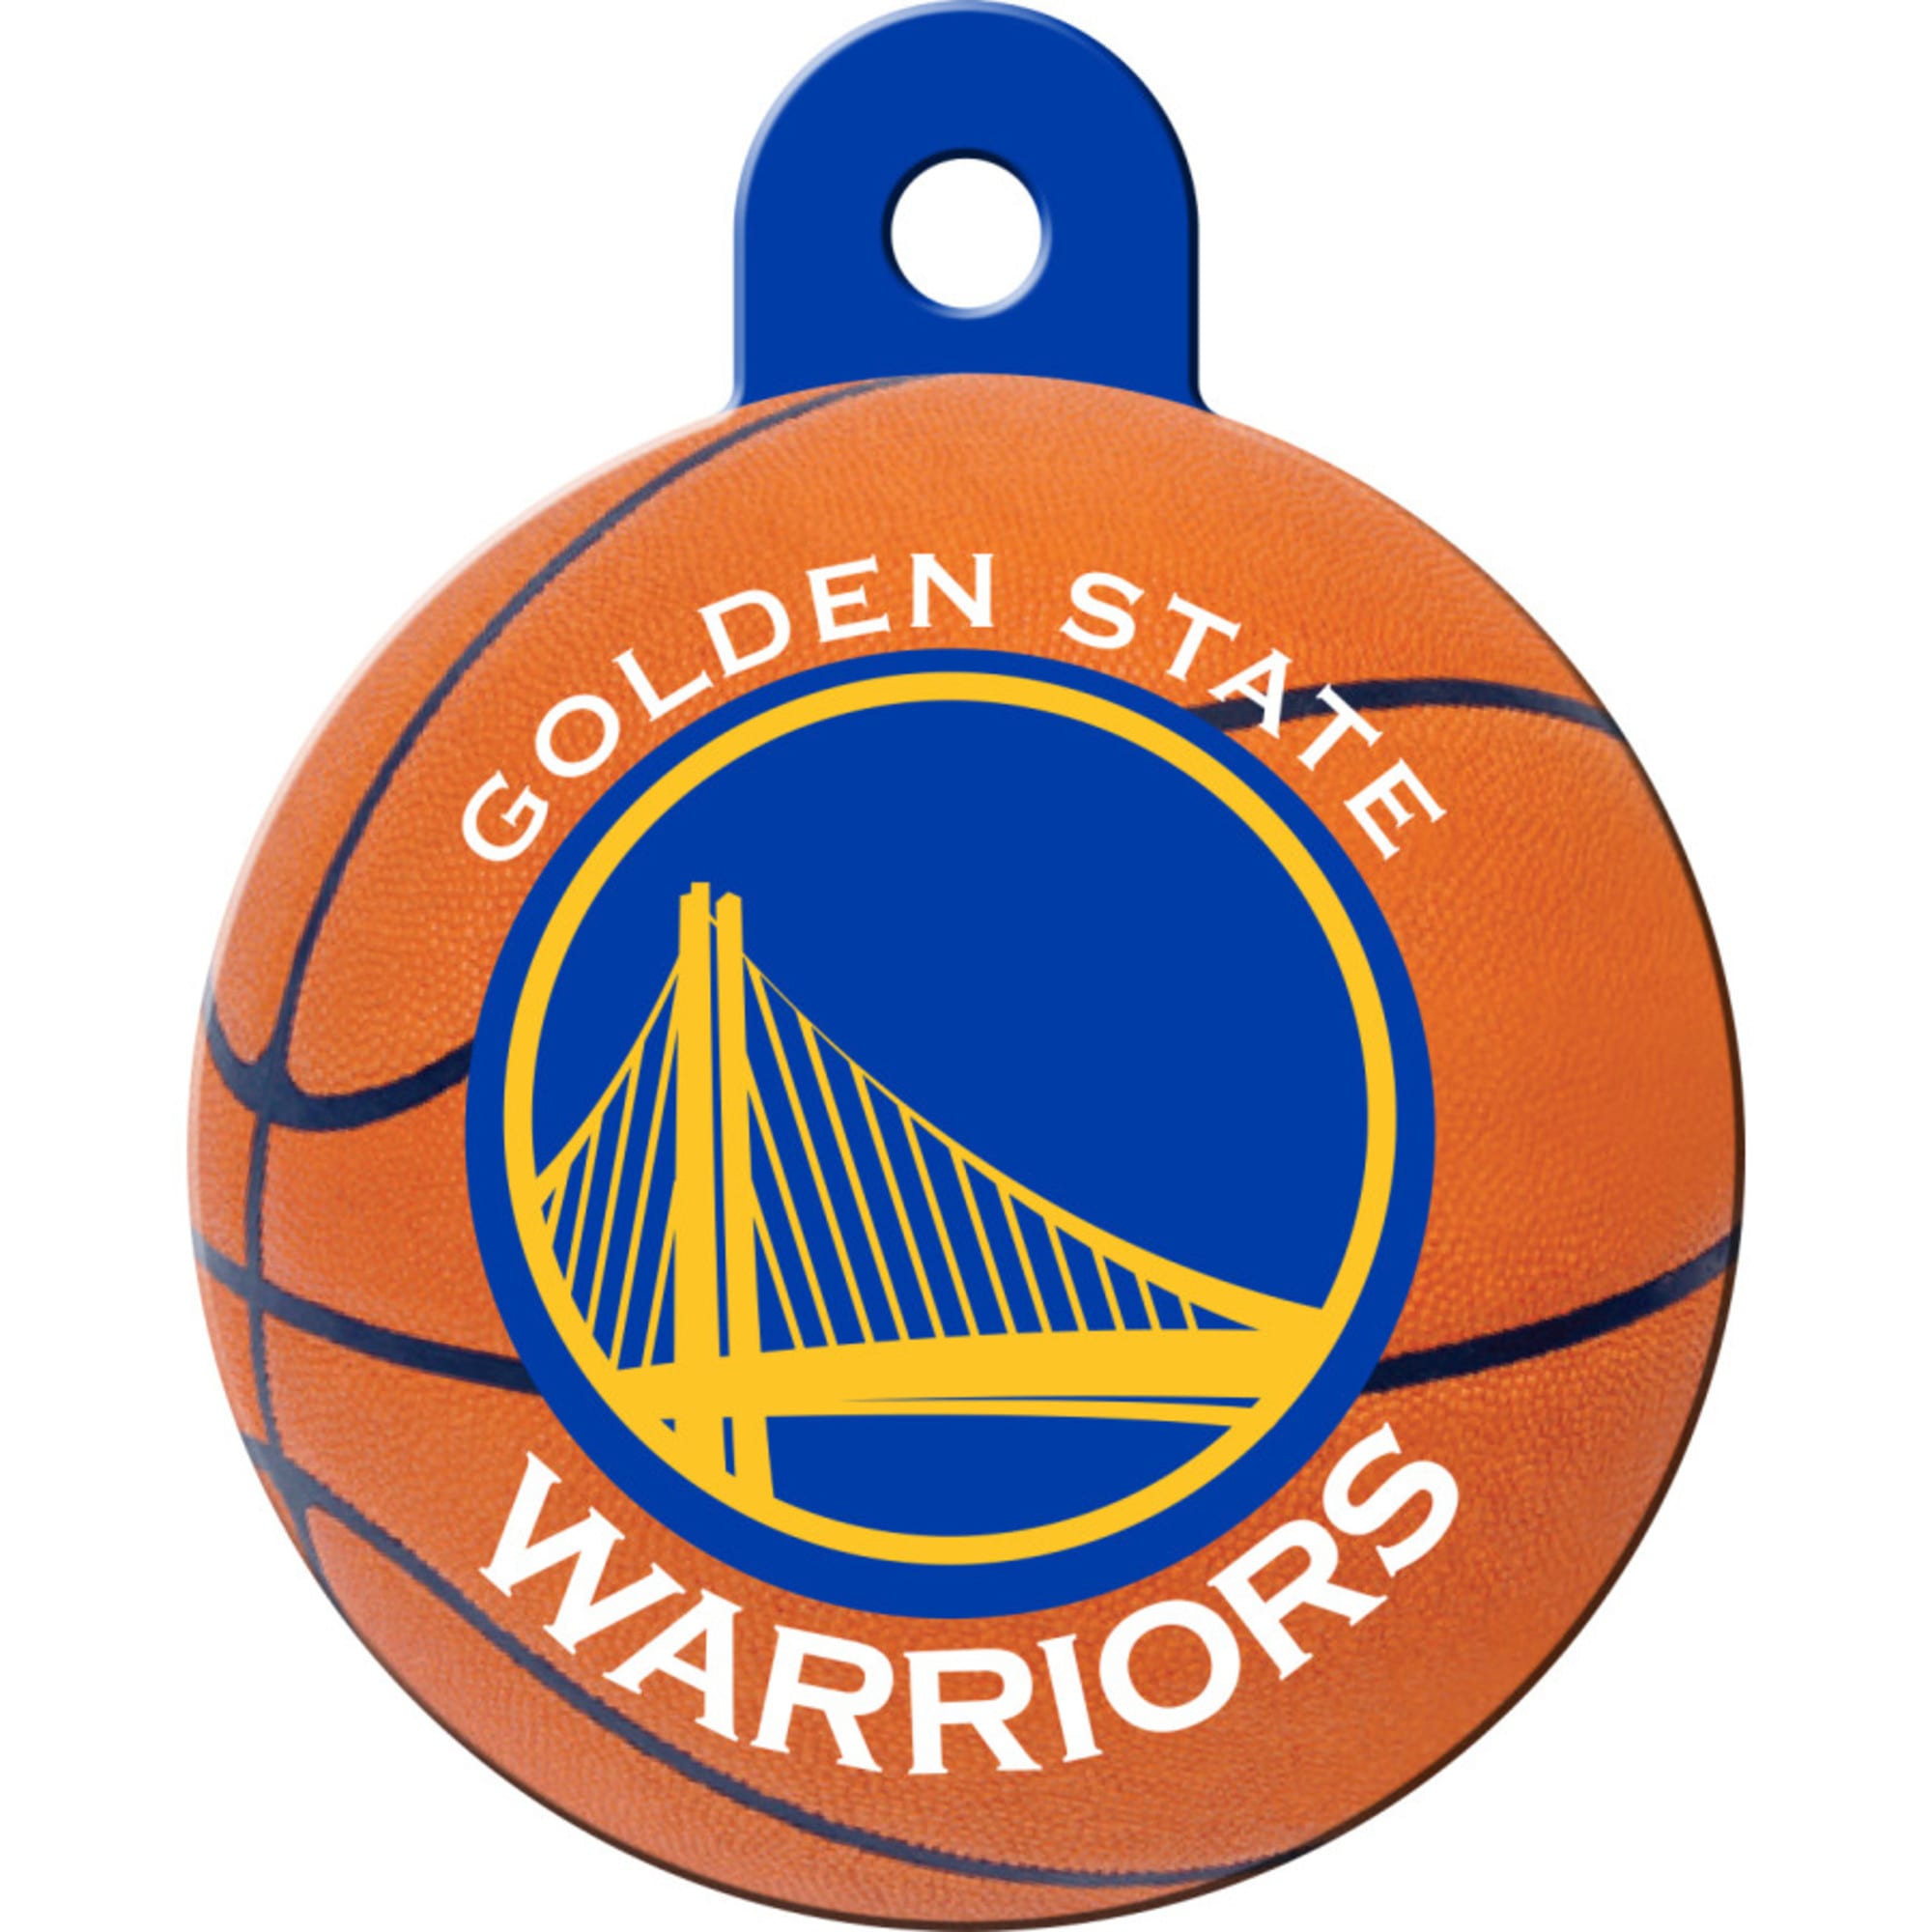 Golden State Warriors Pet Gear, Warriors Leashes, Dog Bowls, Dog Bed